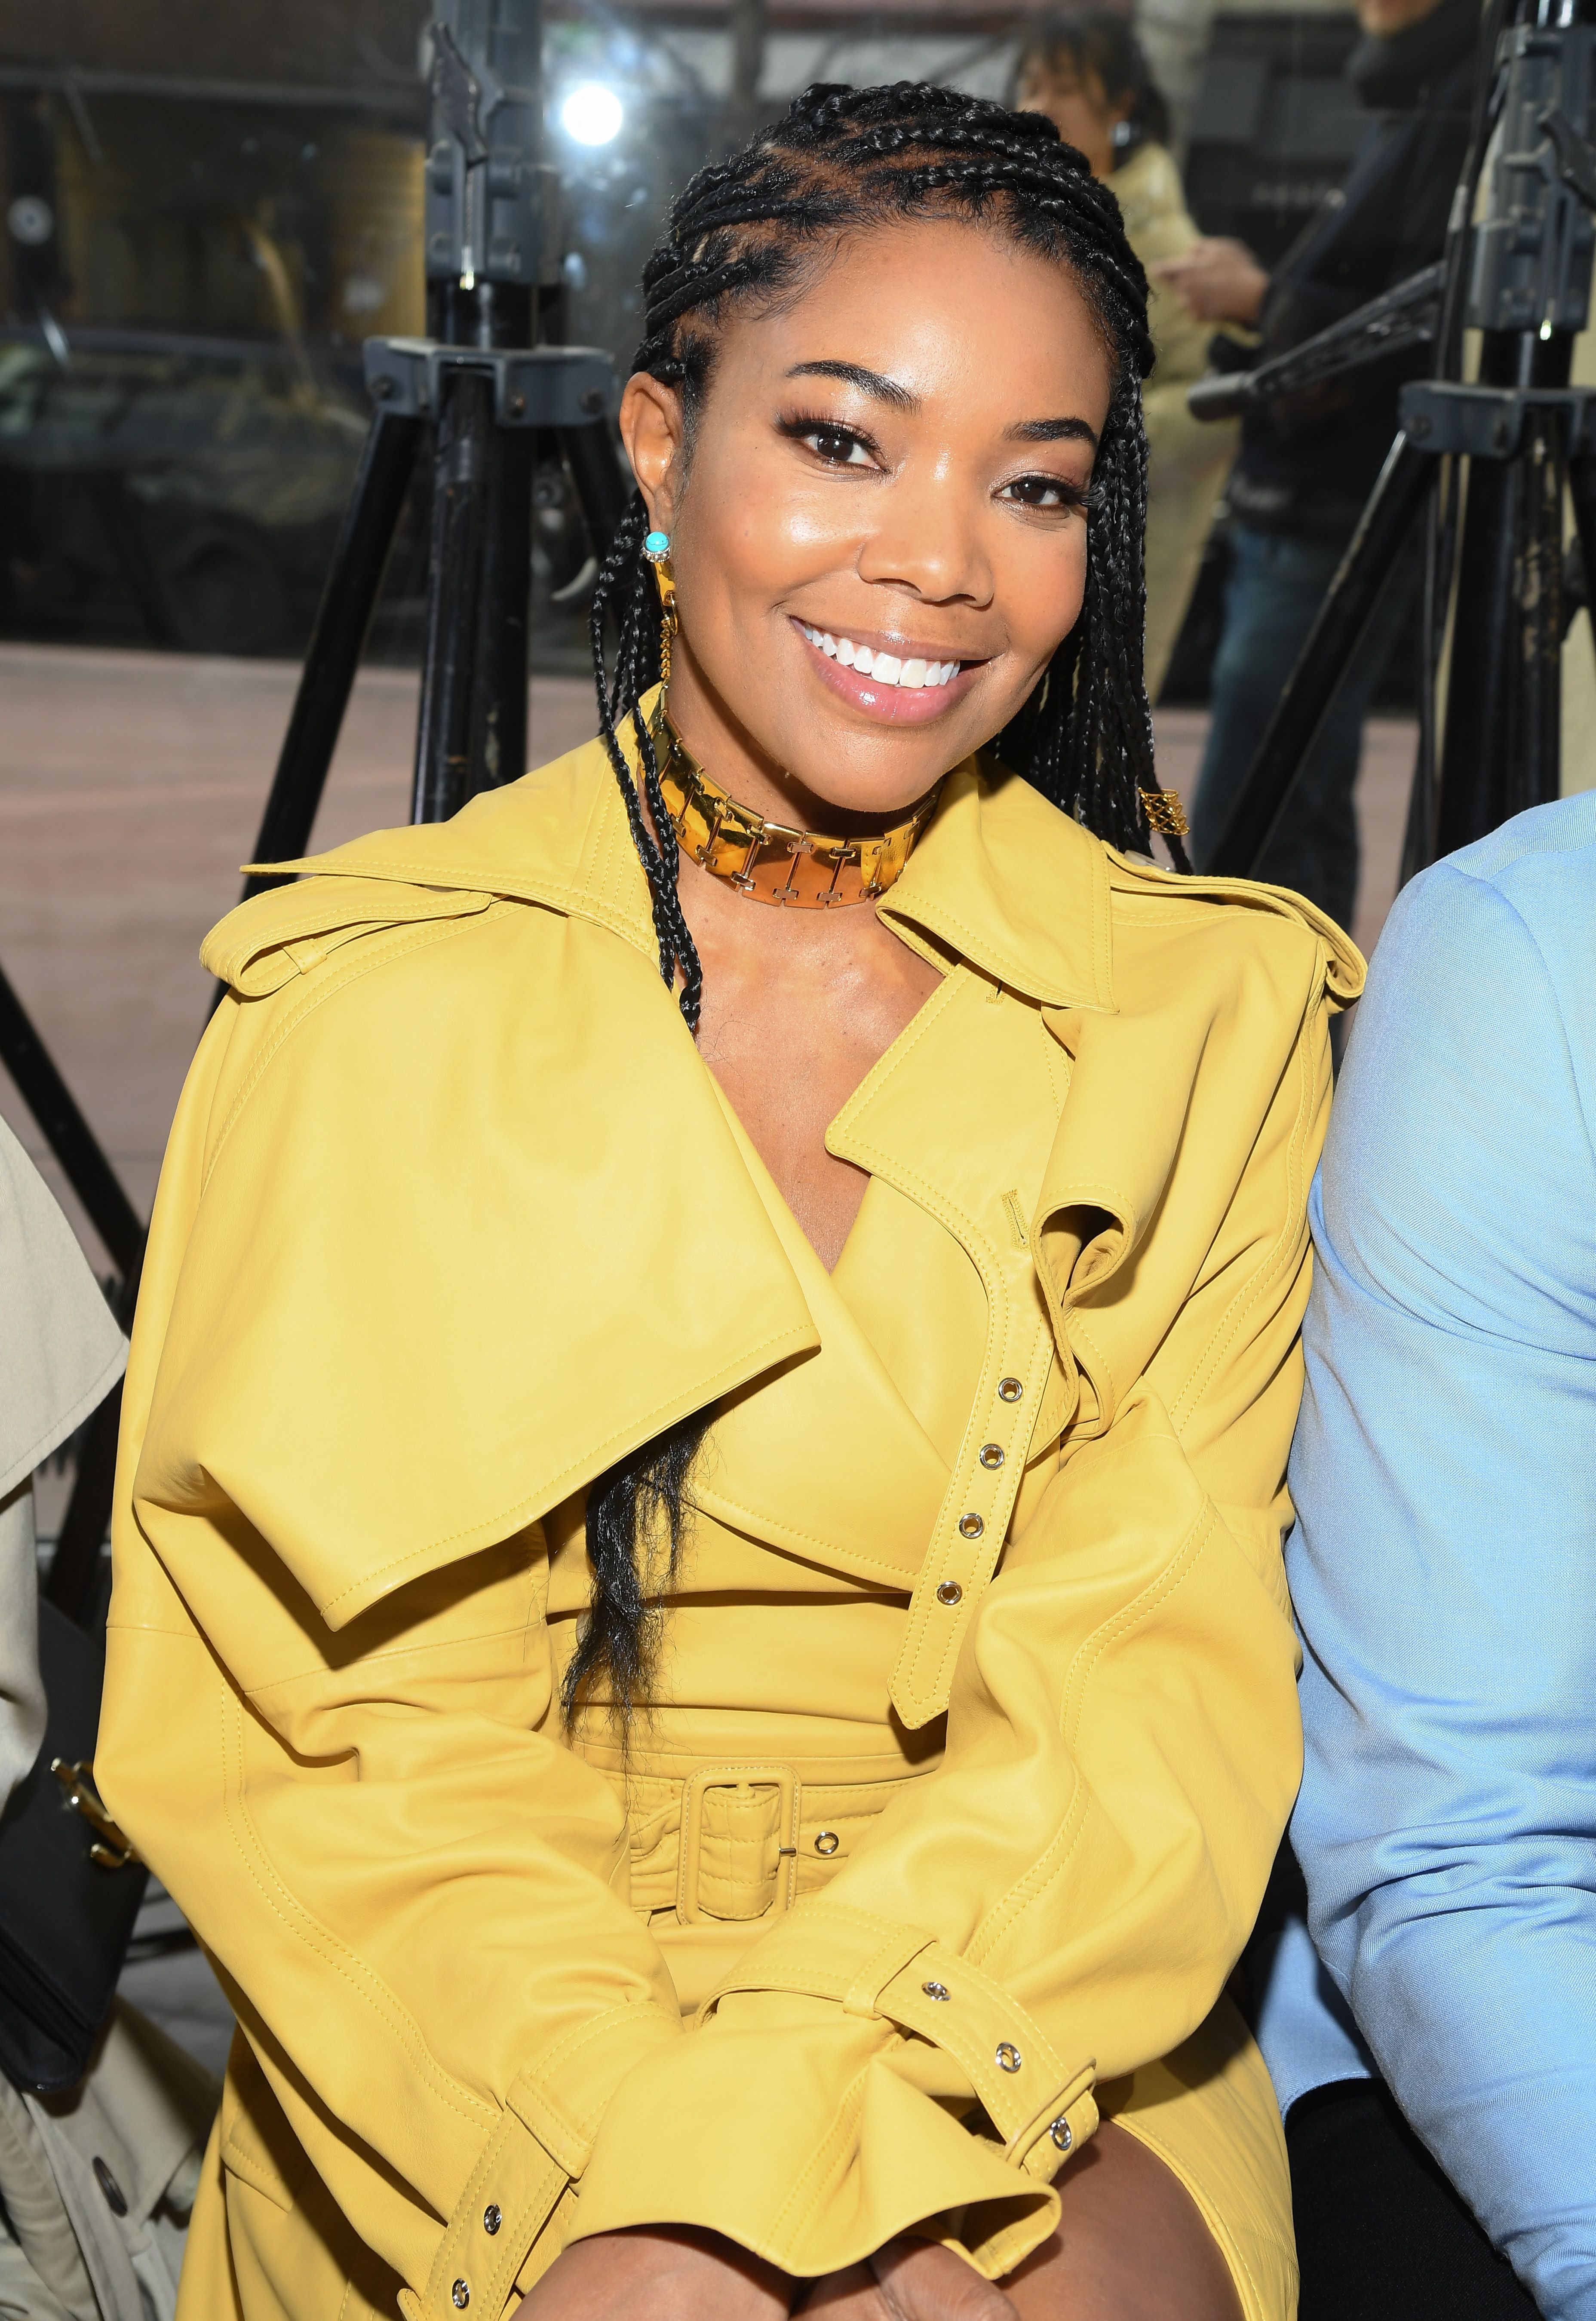 Gabrielle Union during the Lanvin Menswear Fall/Winter 2020-2021 show as part of Paris Fashion Week on January 19, 2020 in Paris, France. | Source: Getty Images